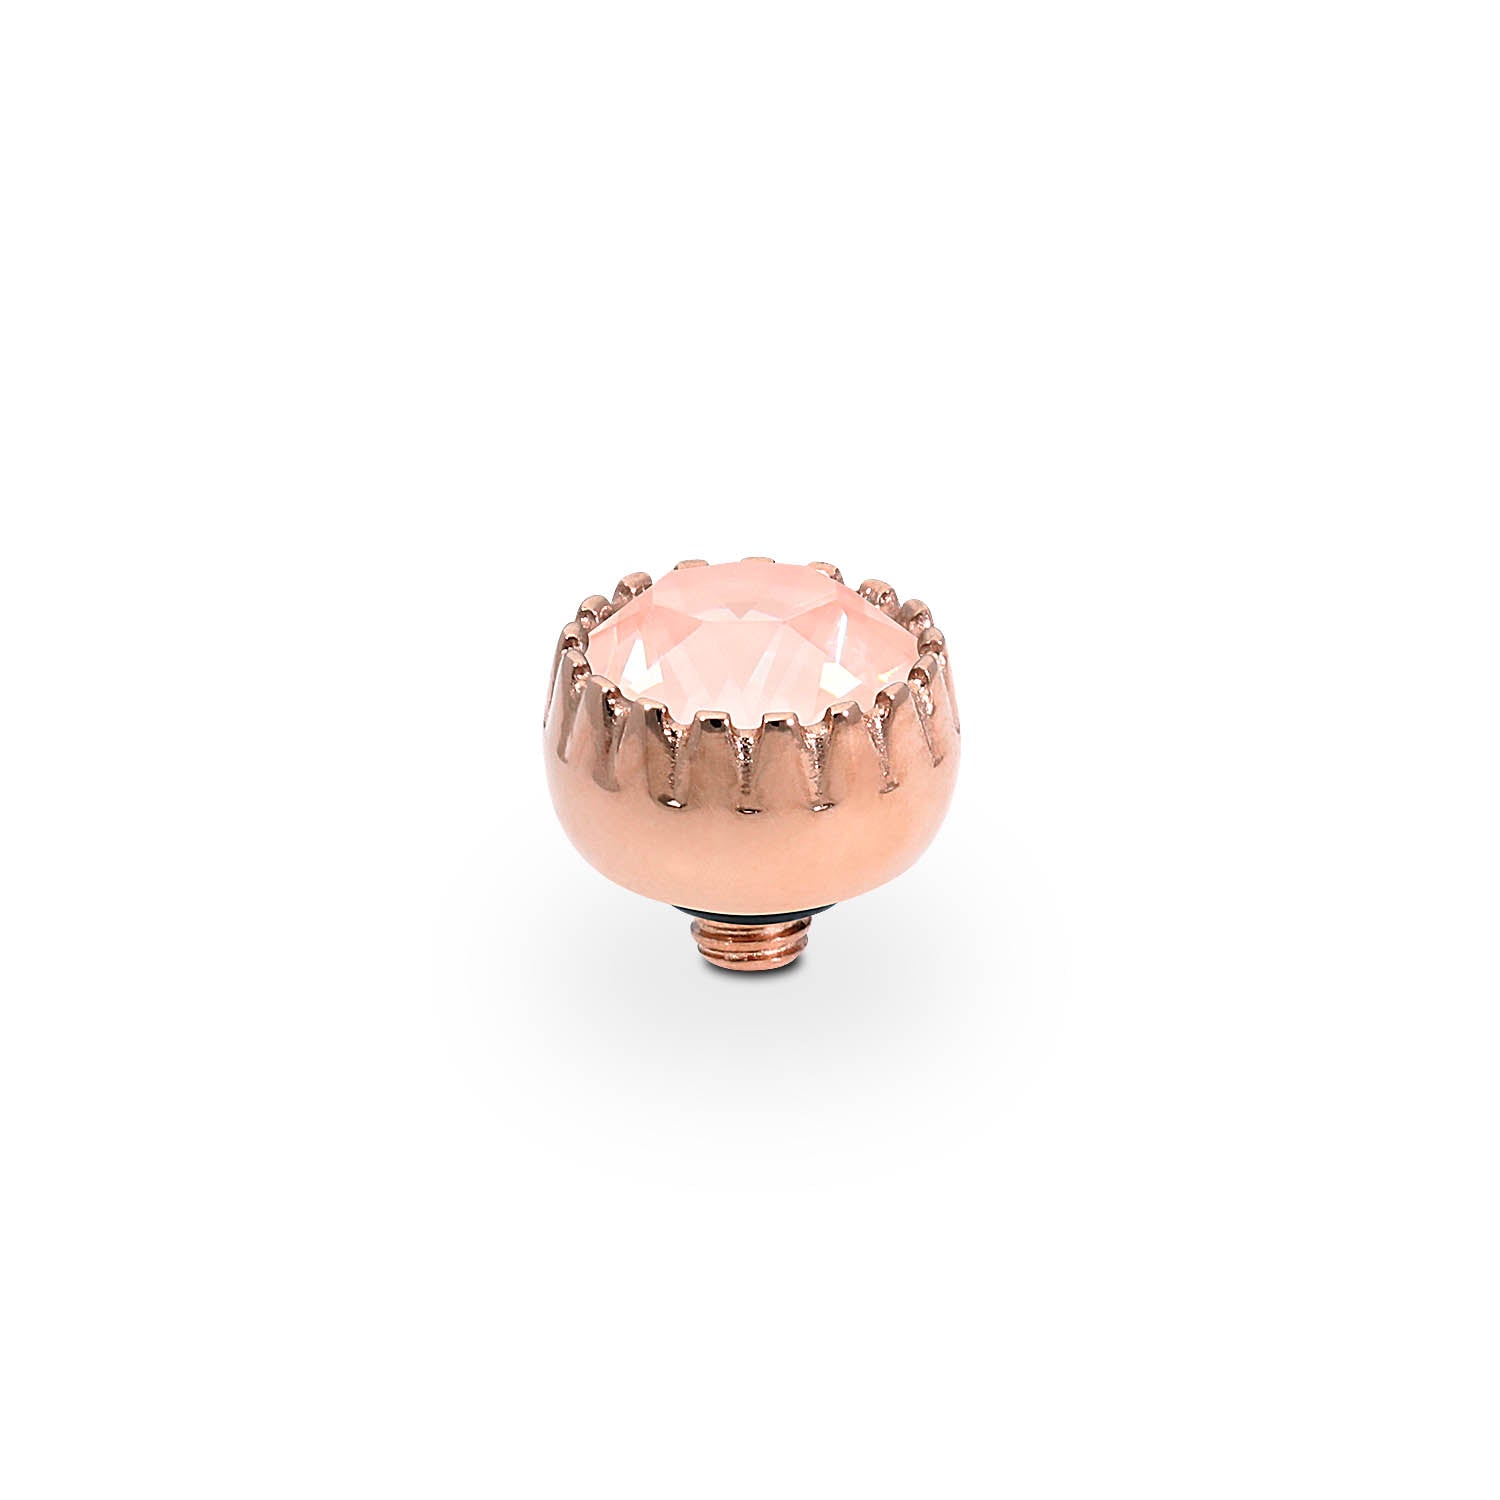 London Small Top 0.31" - Rose Gold